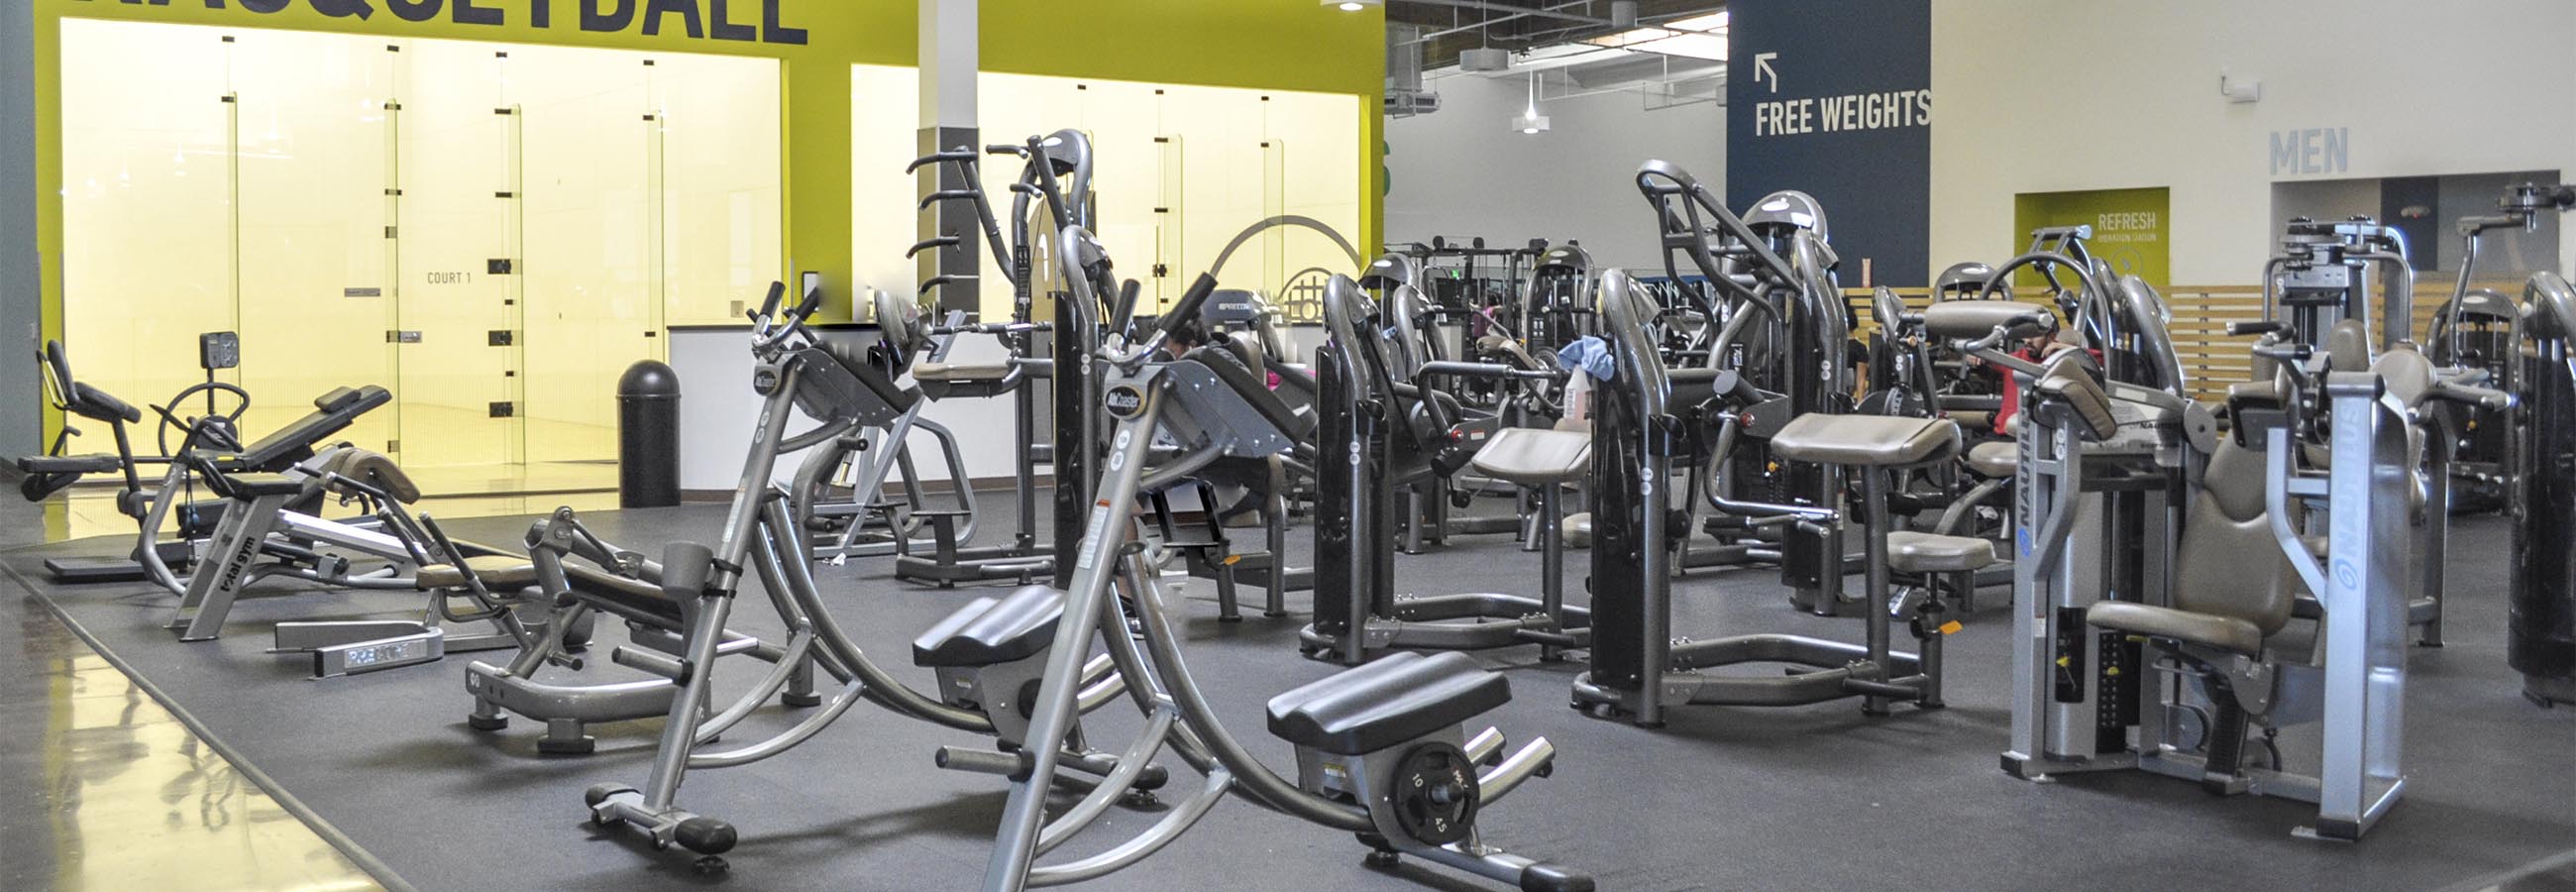 Gyms in East Palmdale, California 93552